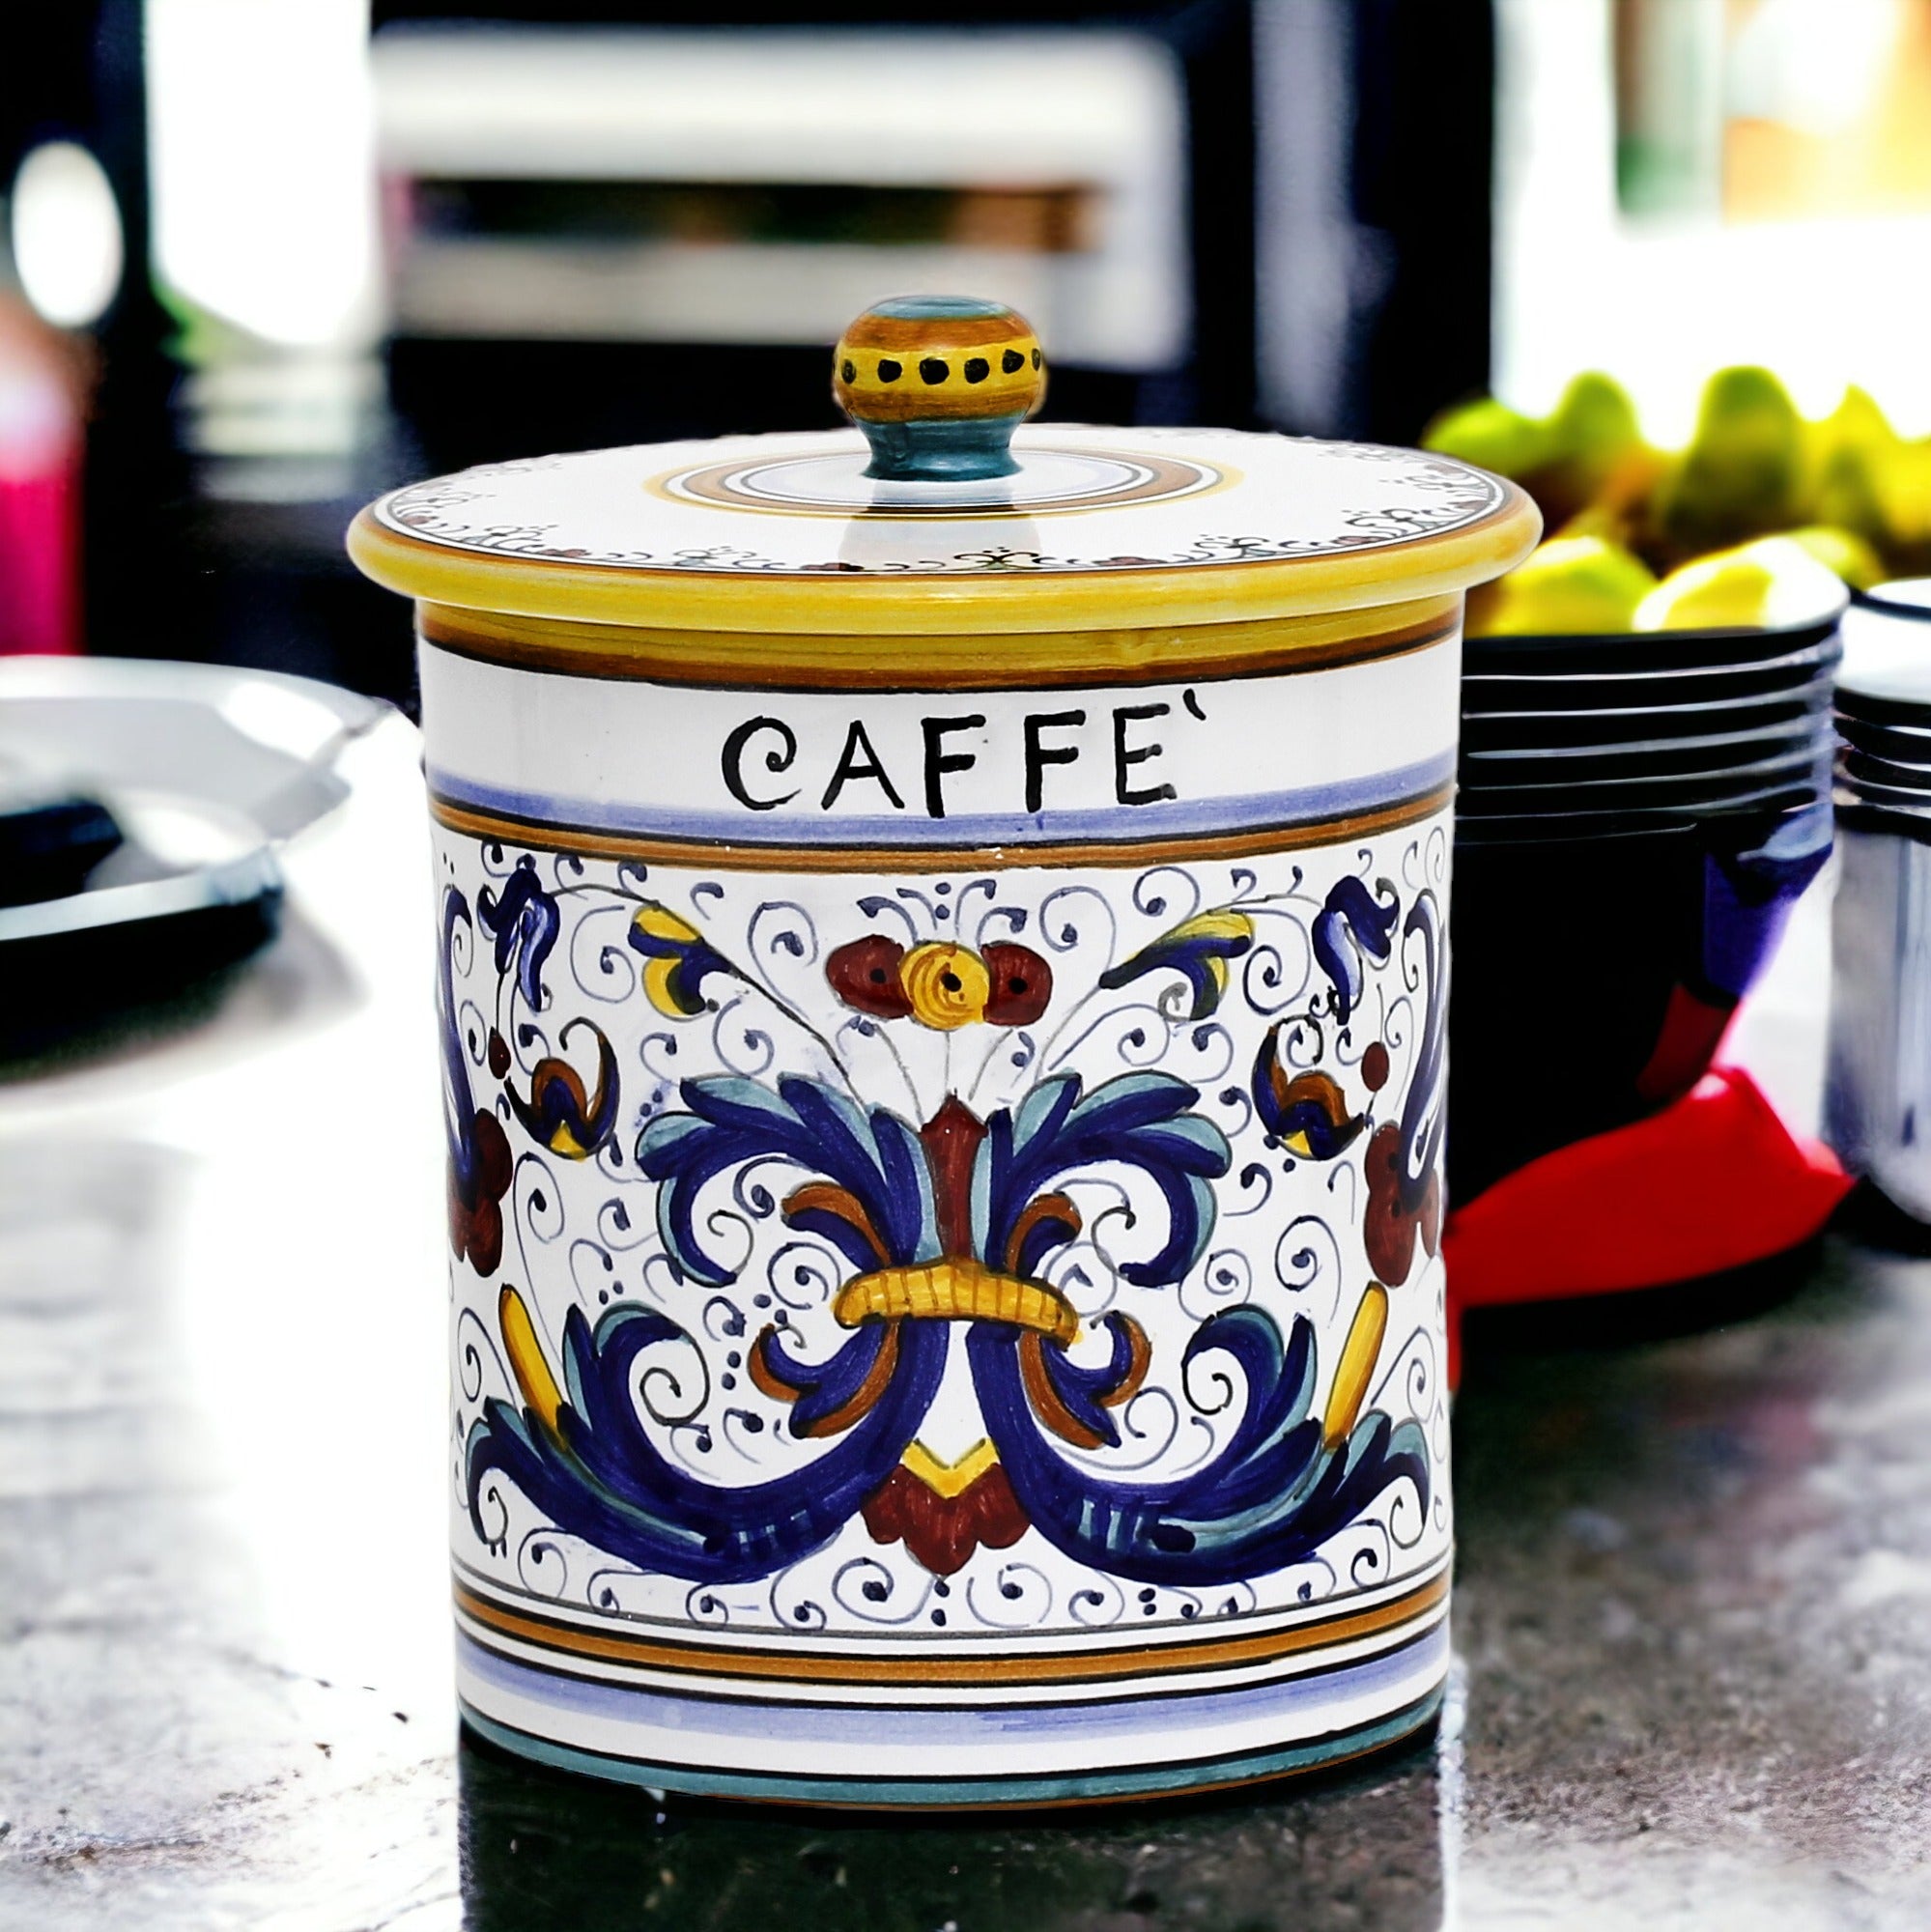 RICCO DERUTA DELUXE: Canister with Ceramic Lid - 'CAFFE' (Coffee)